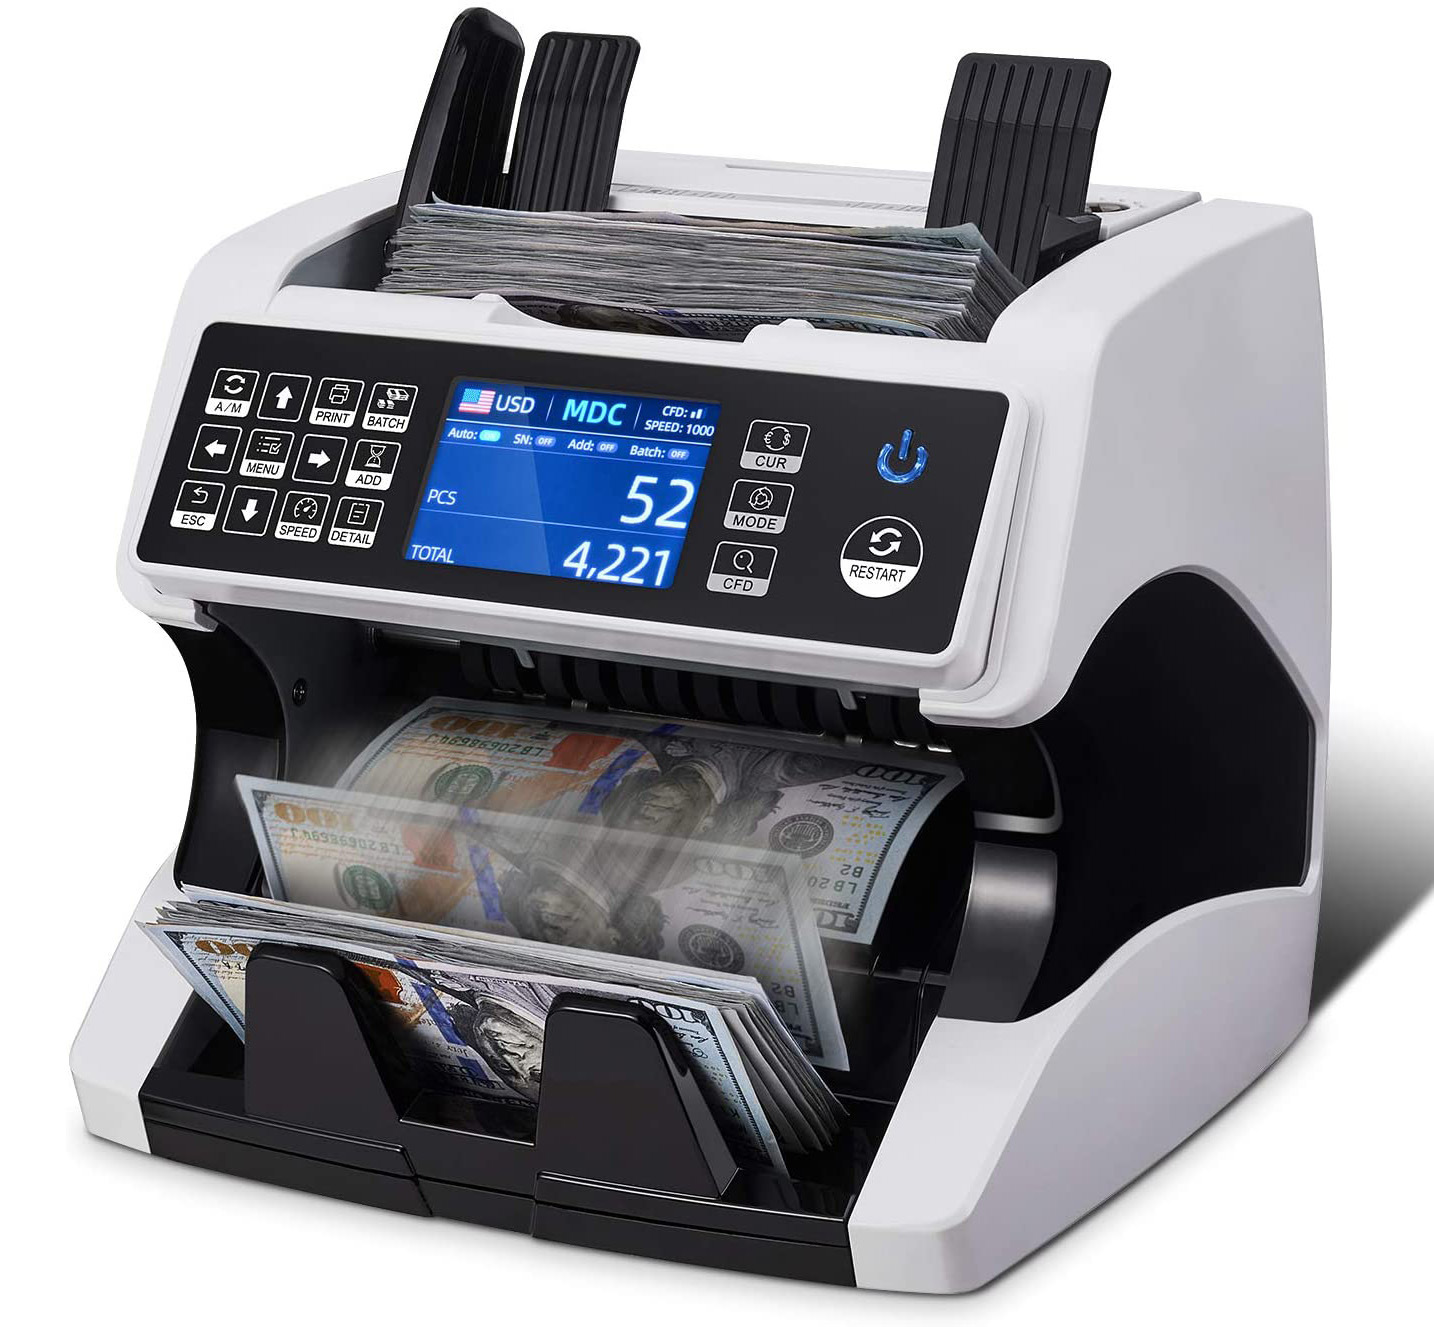 Black Manual Currency Counting Machine Manufacturer & Seller in Delhi - Elcon Security Systems